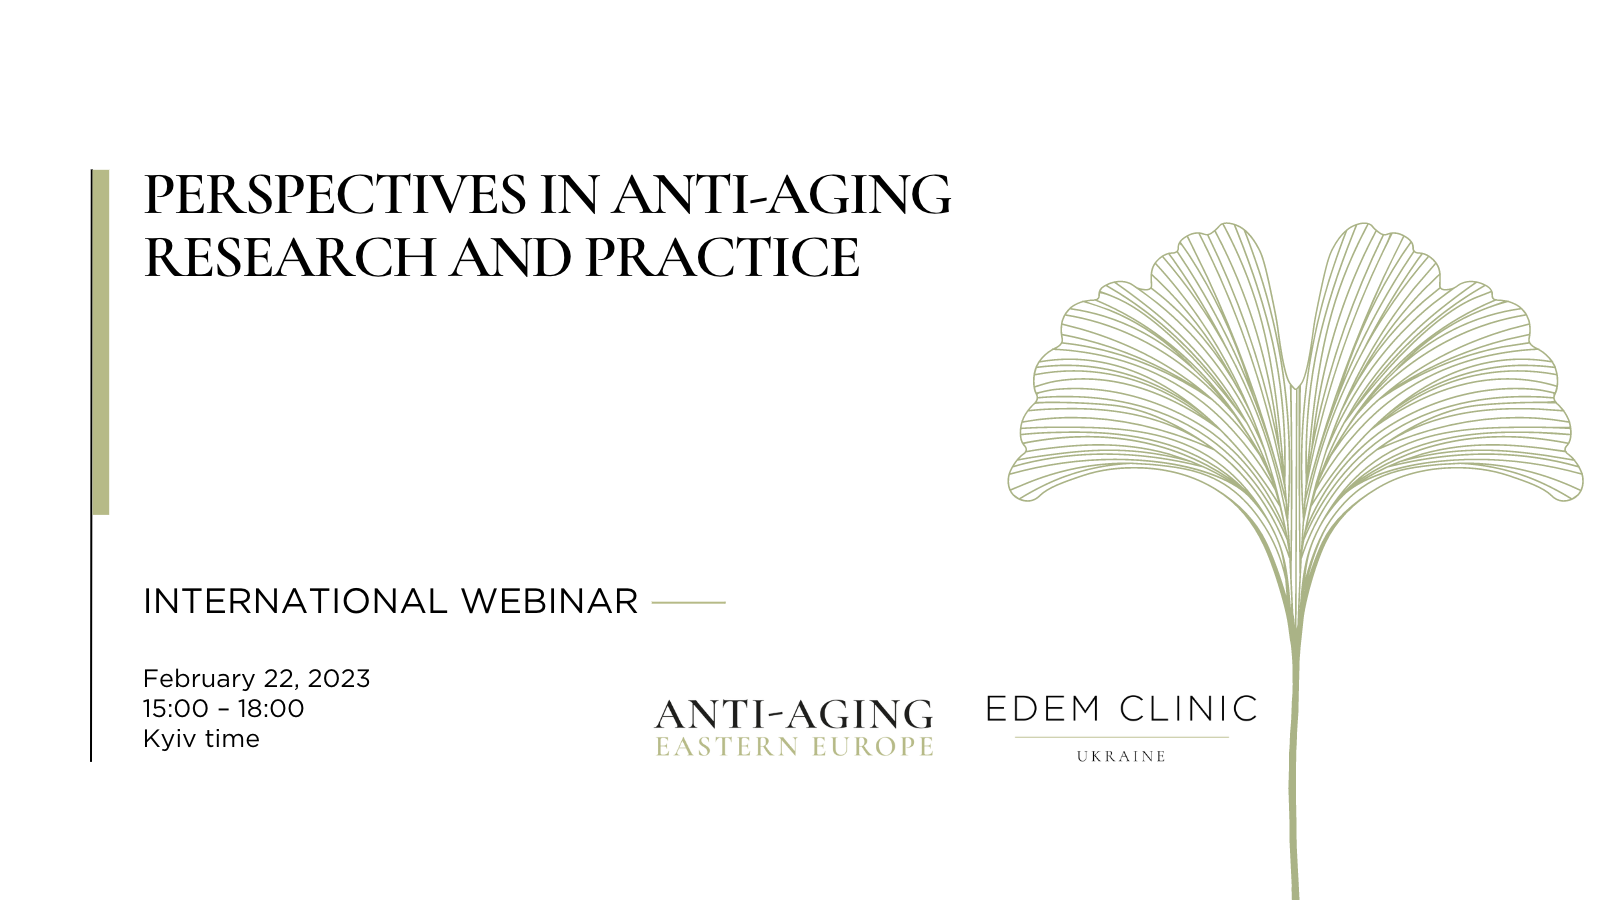 Webinar on Perspectives in Anti-Aging Research and Practice